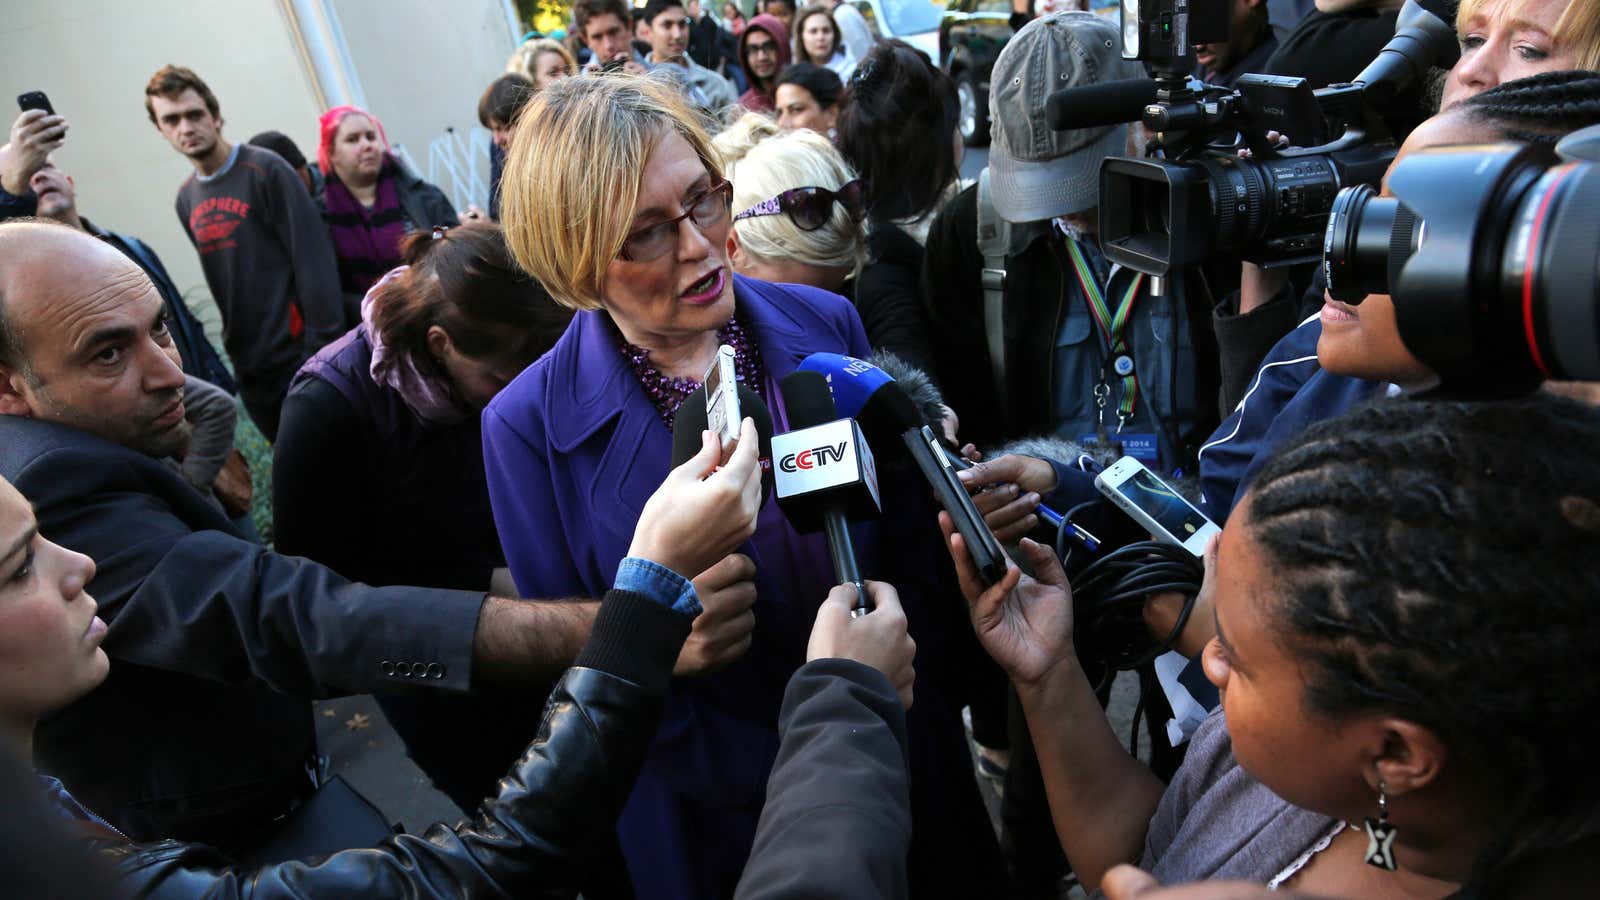 South African opposition Democratic Alliance leader Helen Zille (C) speaks to the media before casting her vote in Rondebosch, Cape Town, May 7, 2014.